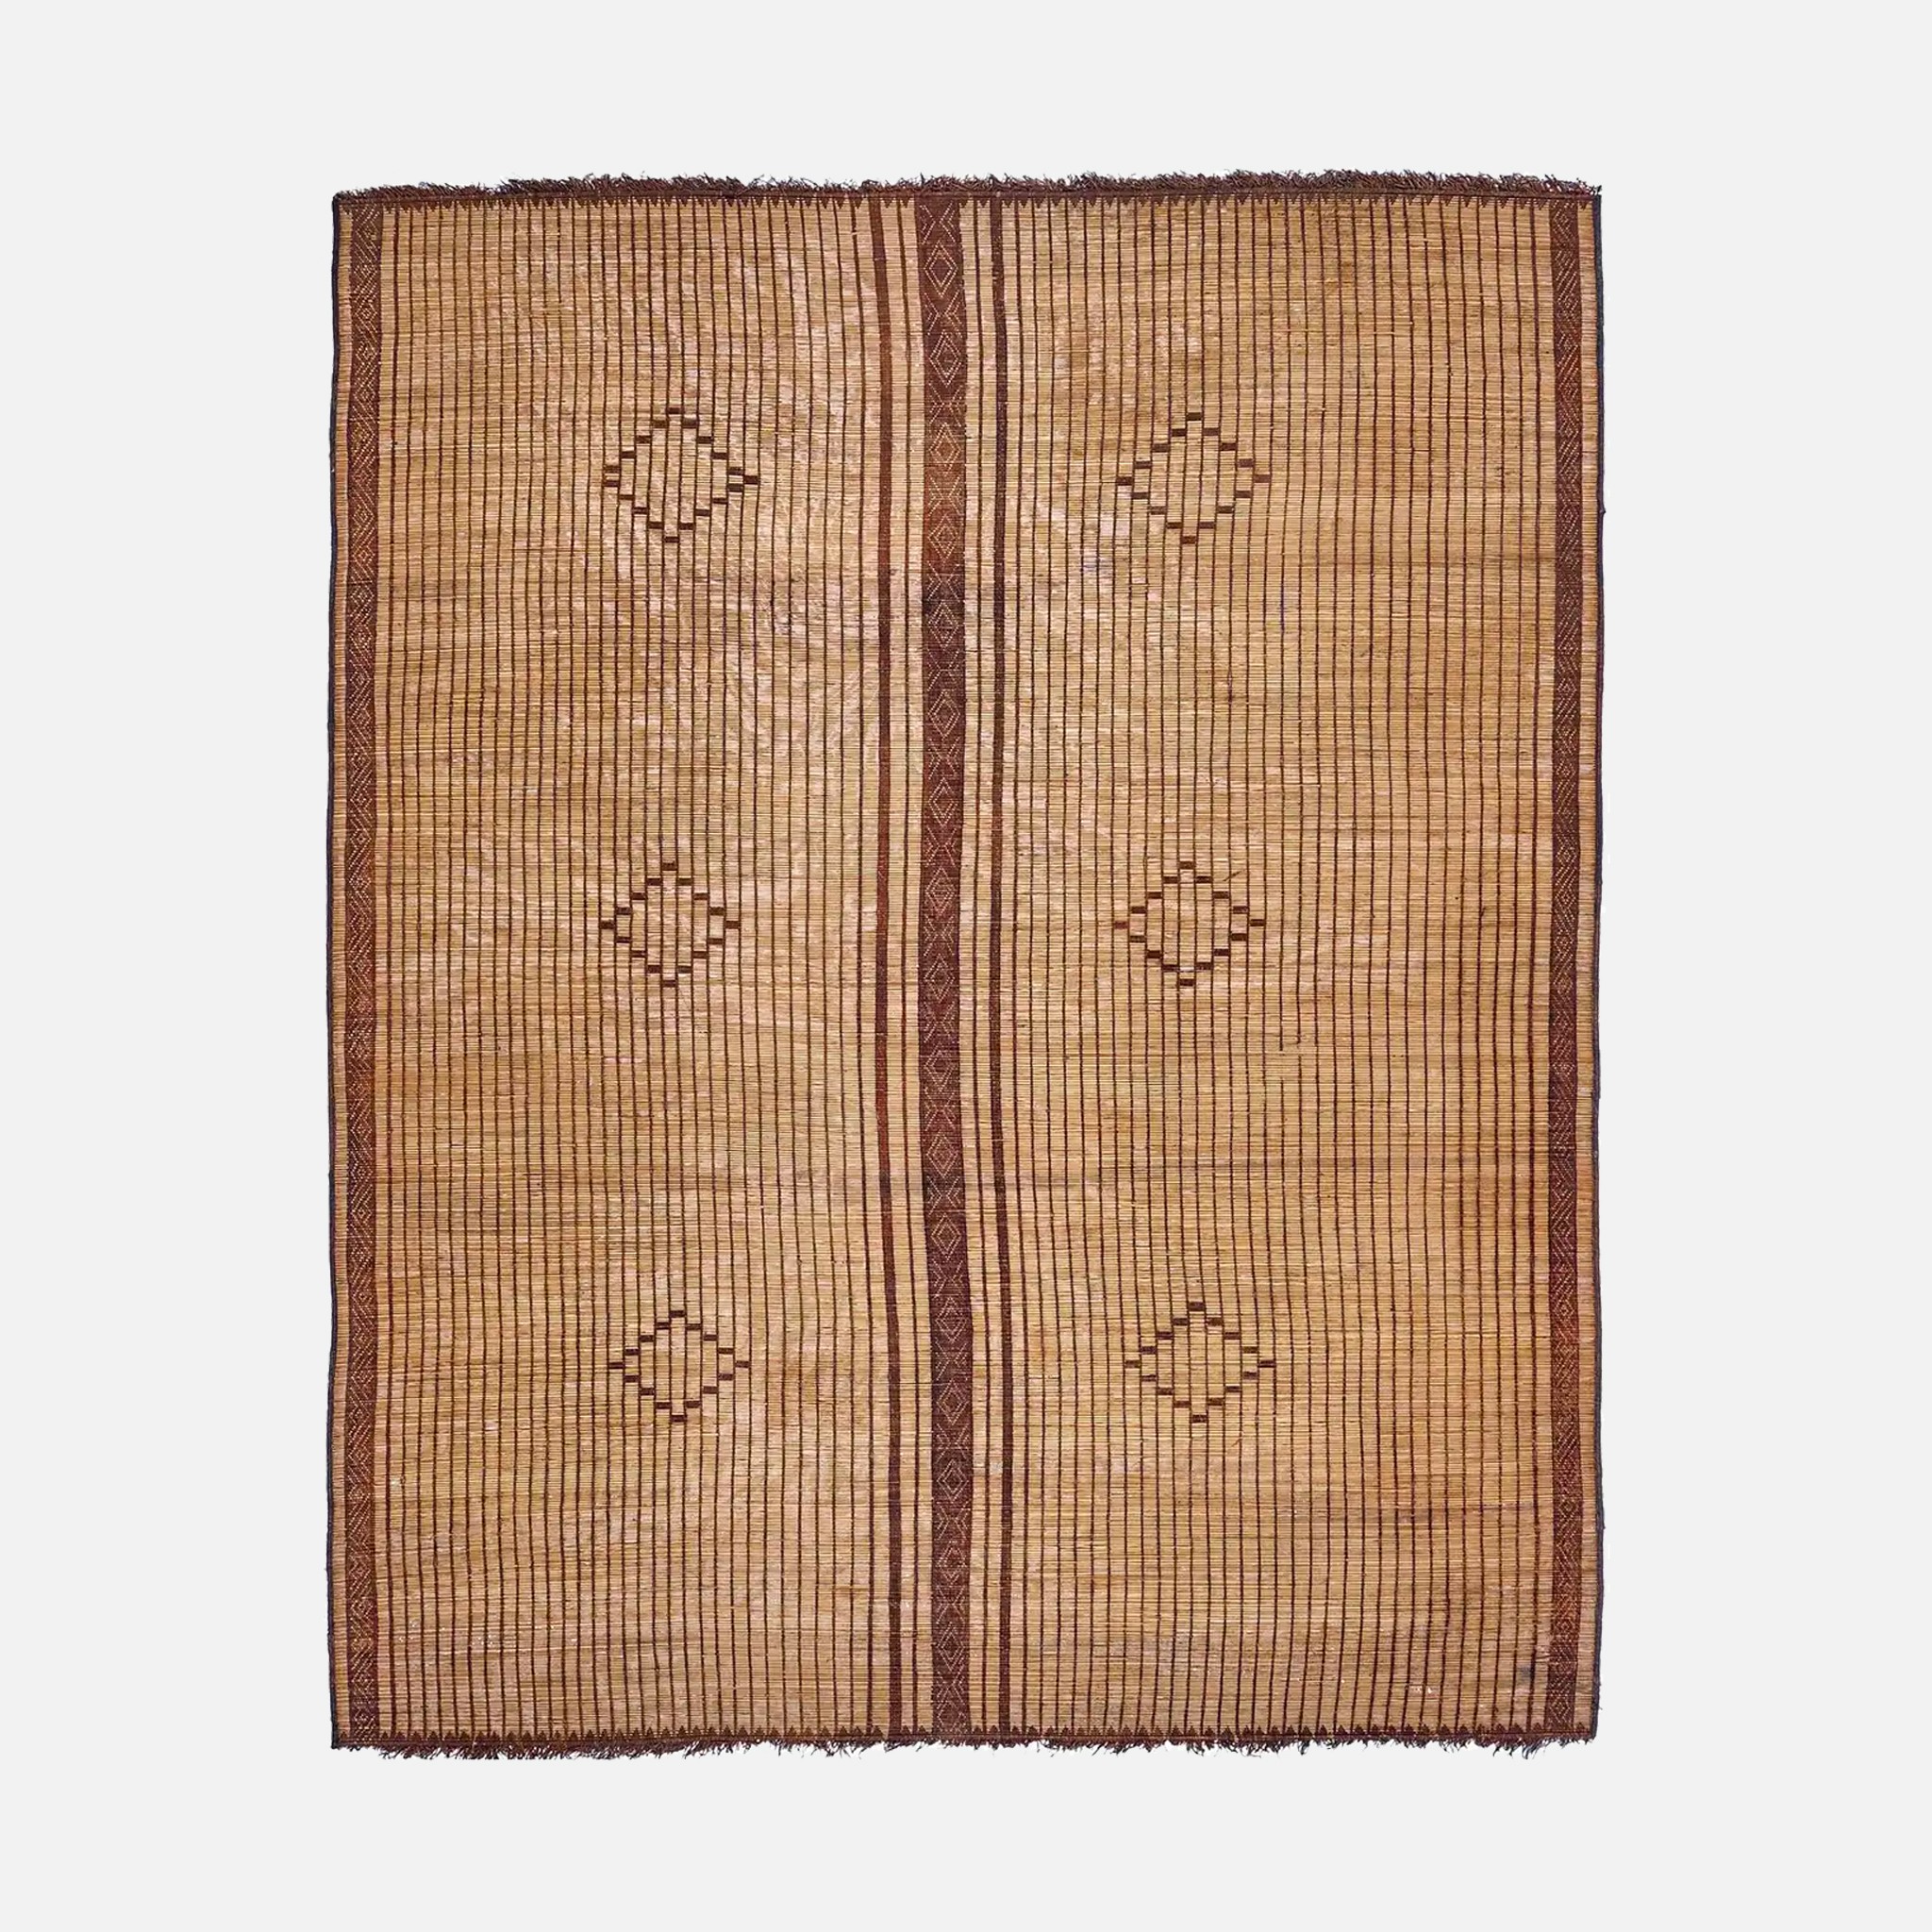 The image of an Vintage Tuareg Mat product